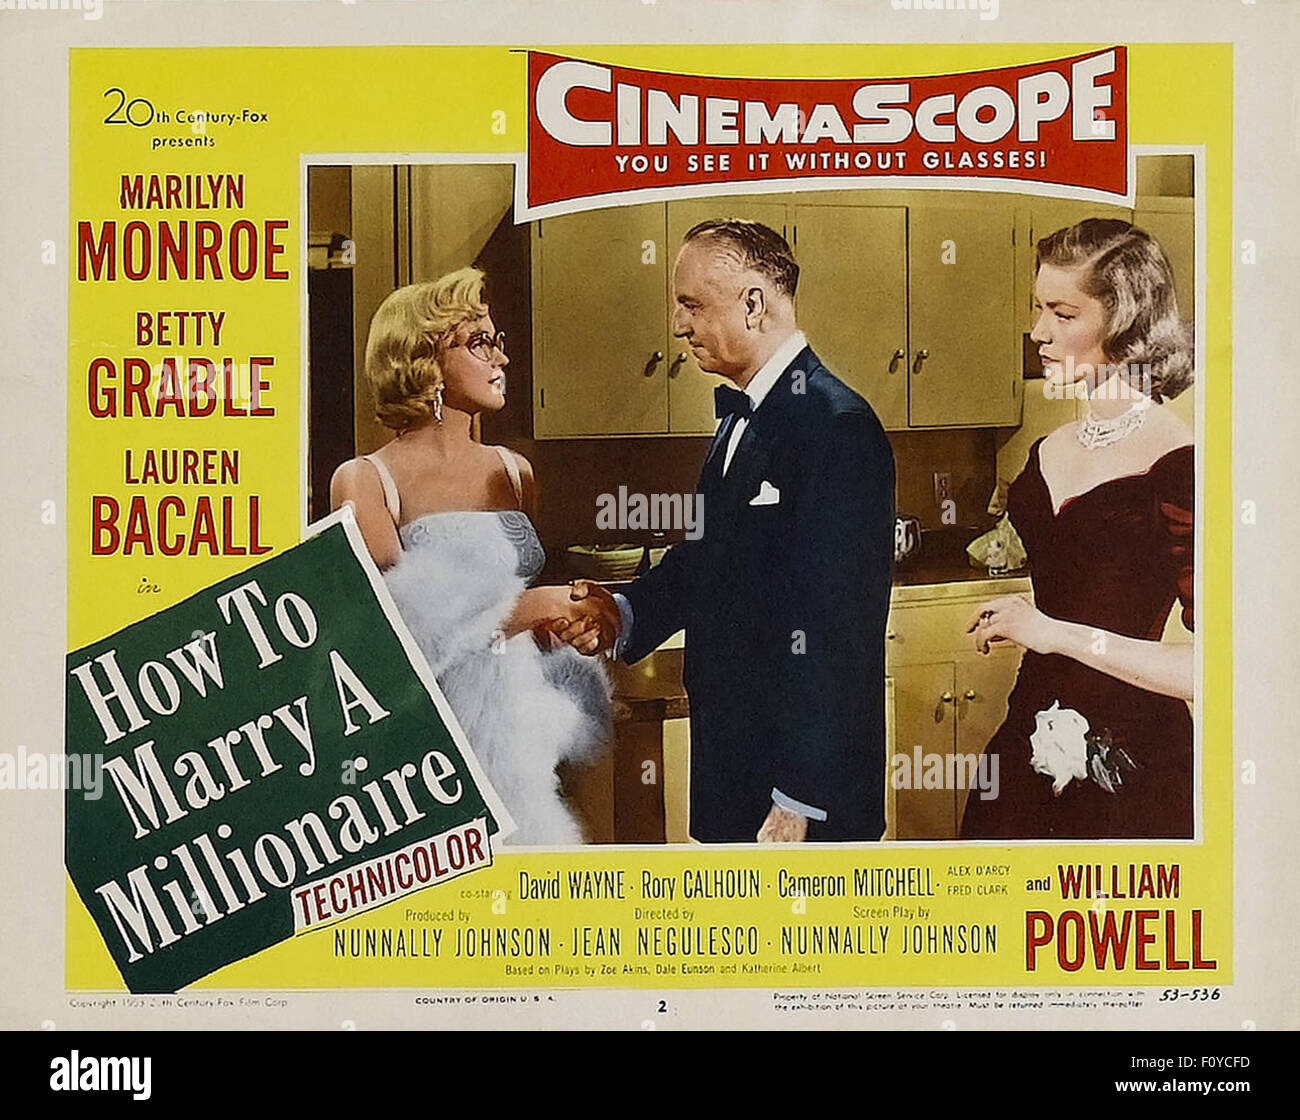 How to Marry a Millionaire - 02 - Movie Poster Stock Photo